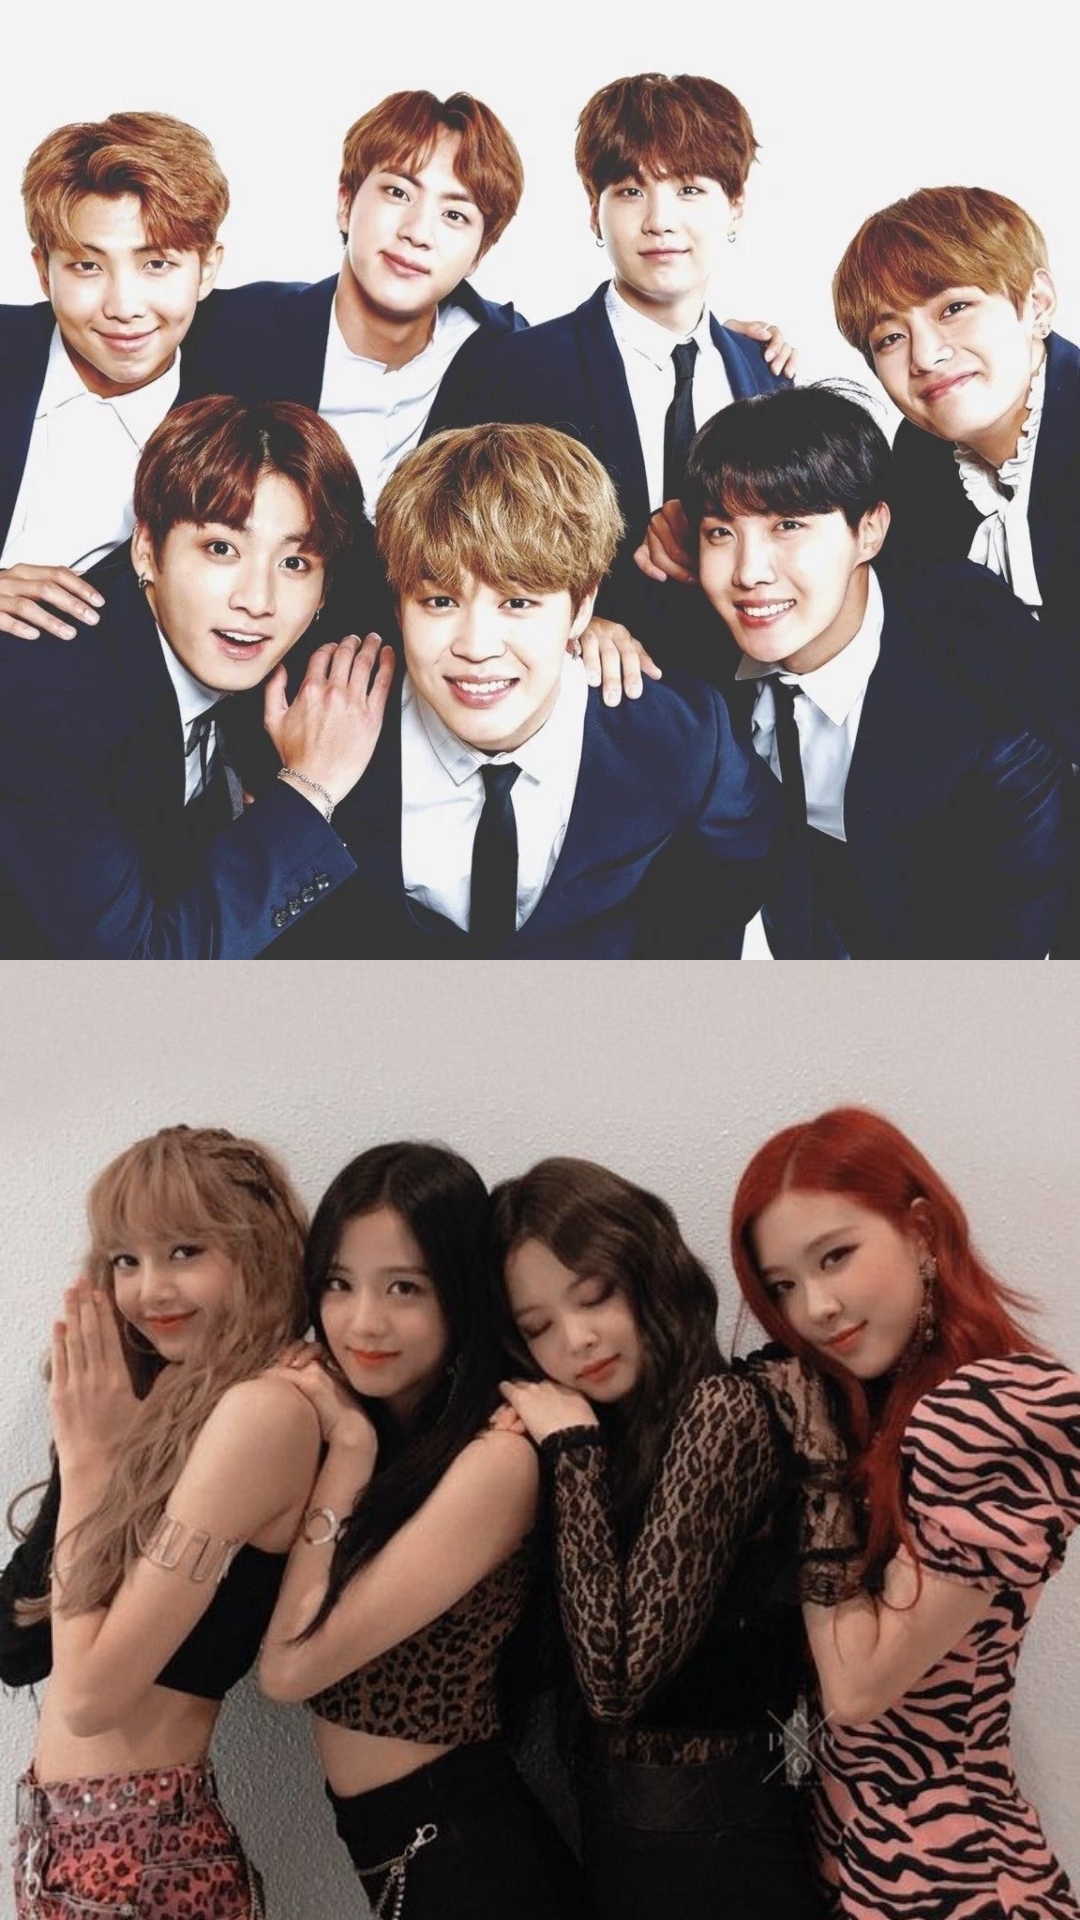 BTS, BLACKPINK & others; know most-streamed Kpop artists and songs of 2022